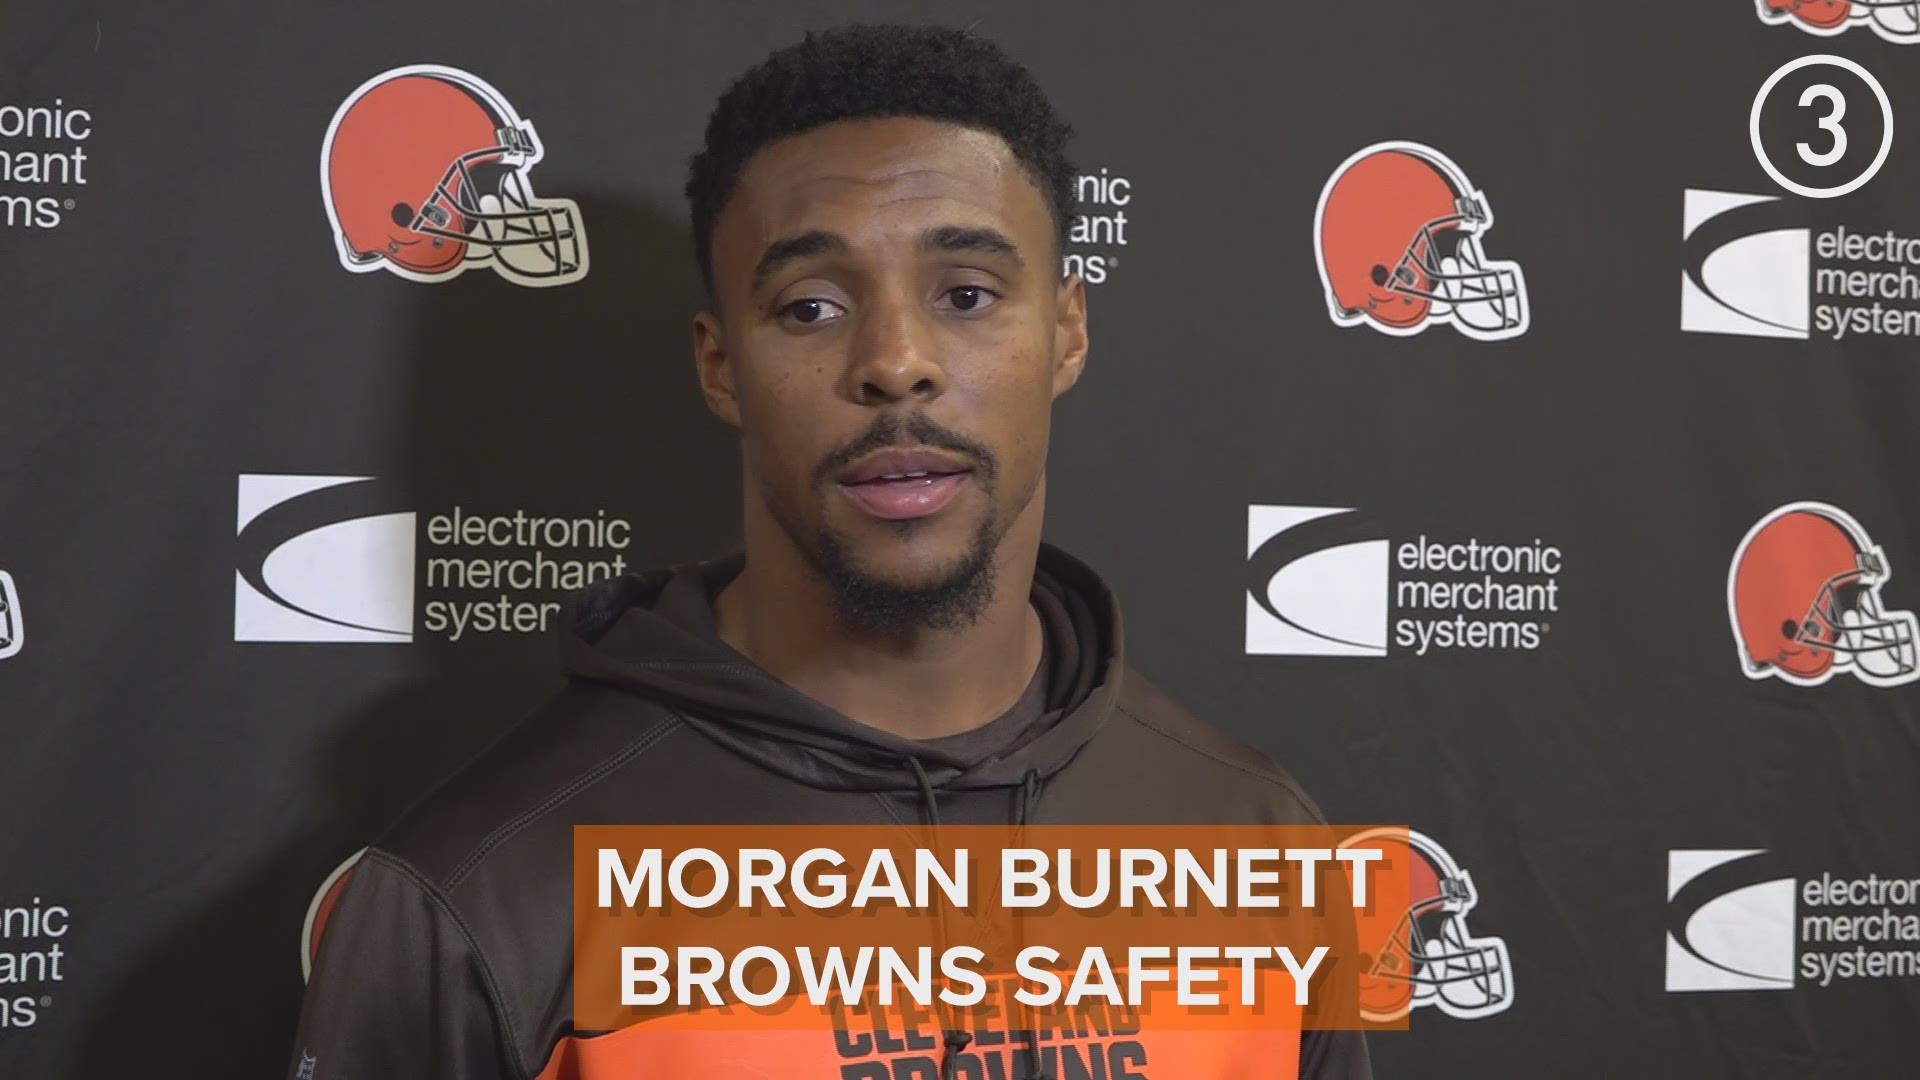 Parting ways!  Browns DB Morgan Burnett is hoping former teammate Jermaine Whitehead ‘gets the help he needs’ after being waived following Sunday's Twitter outburst